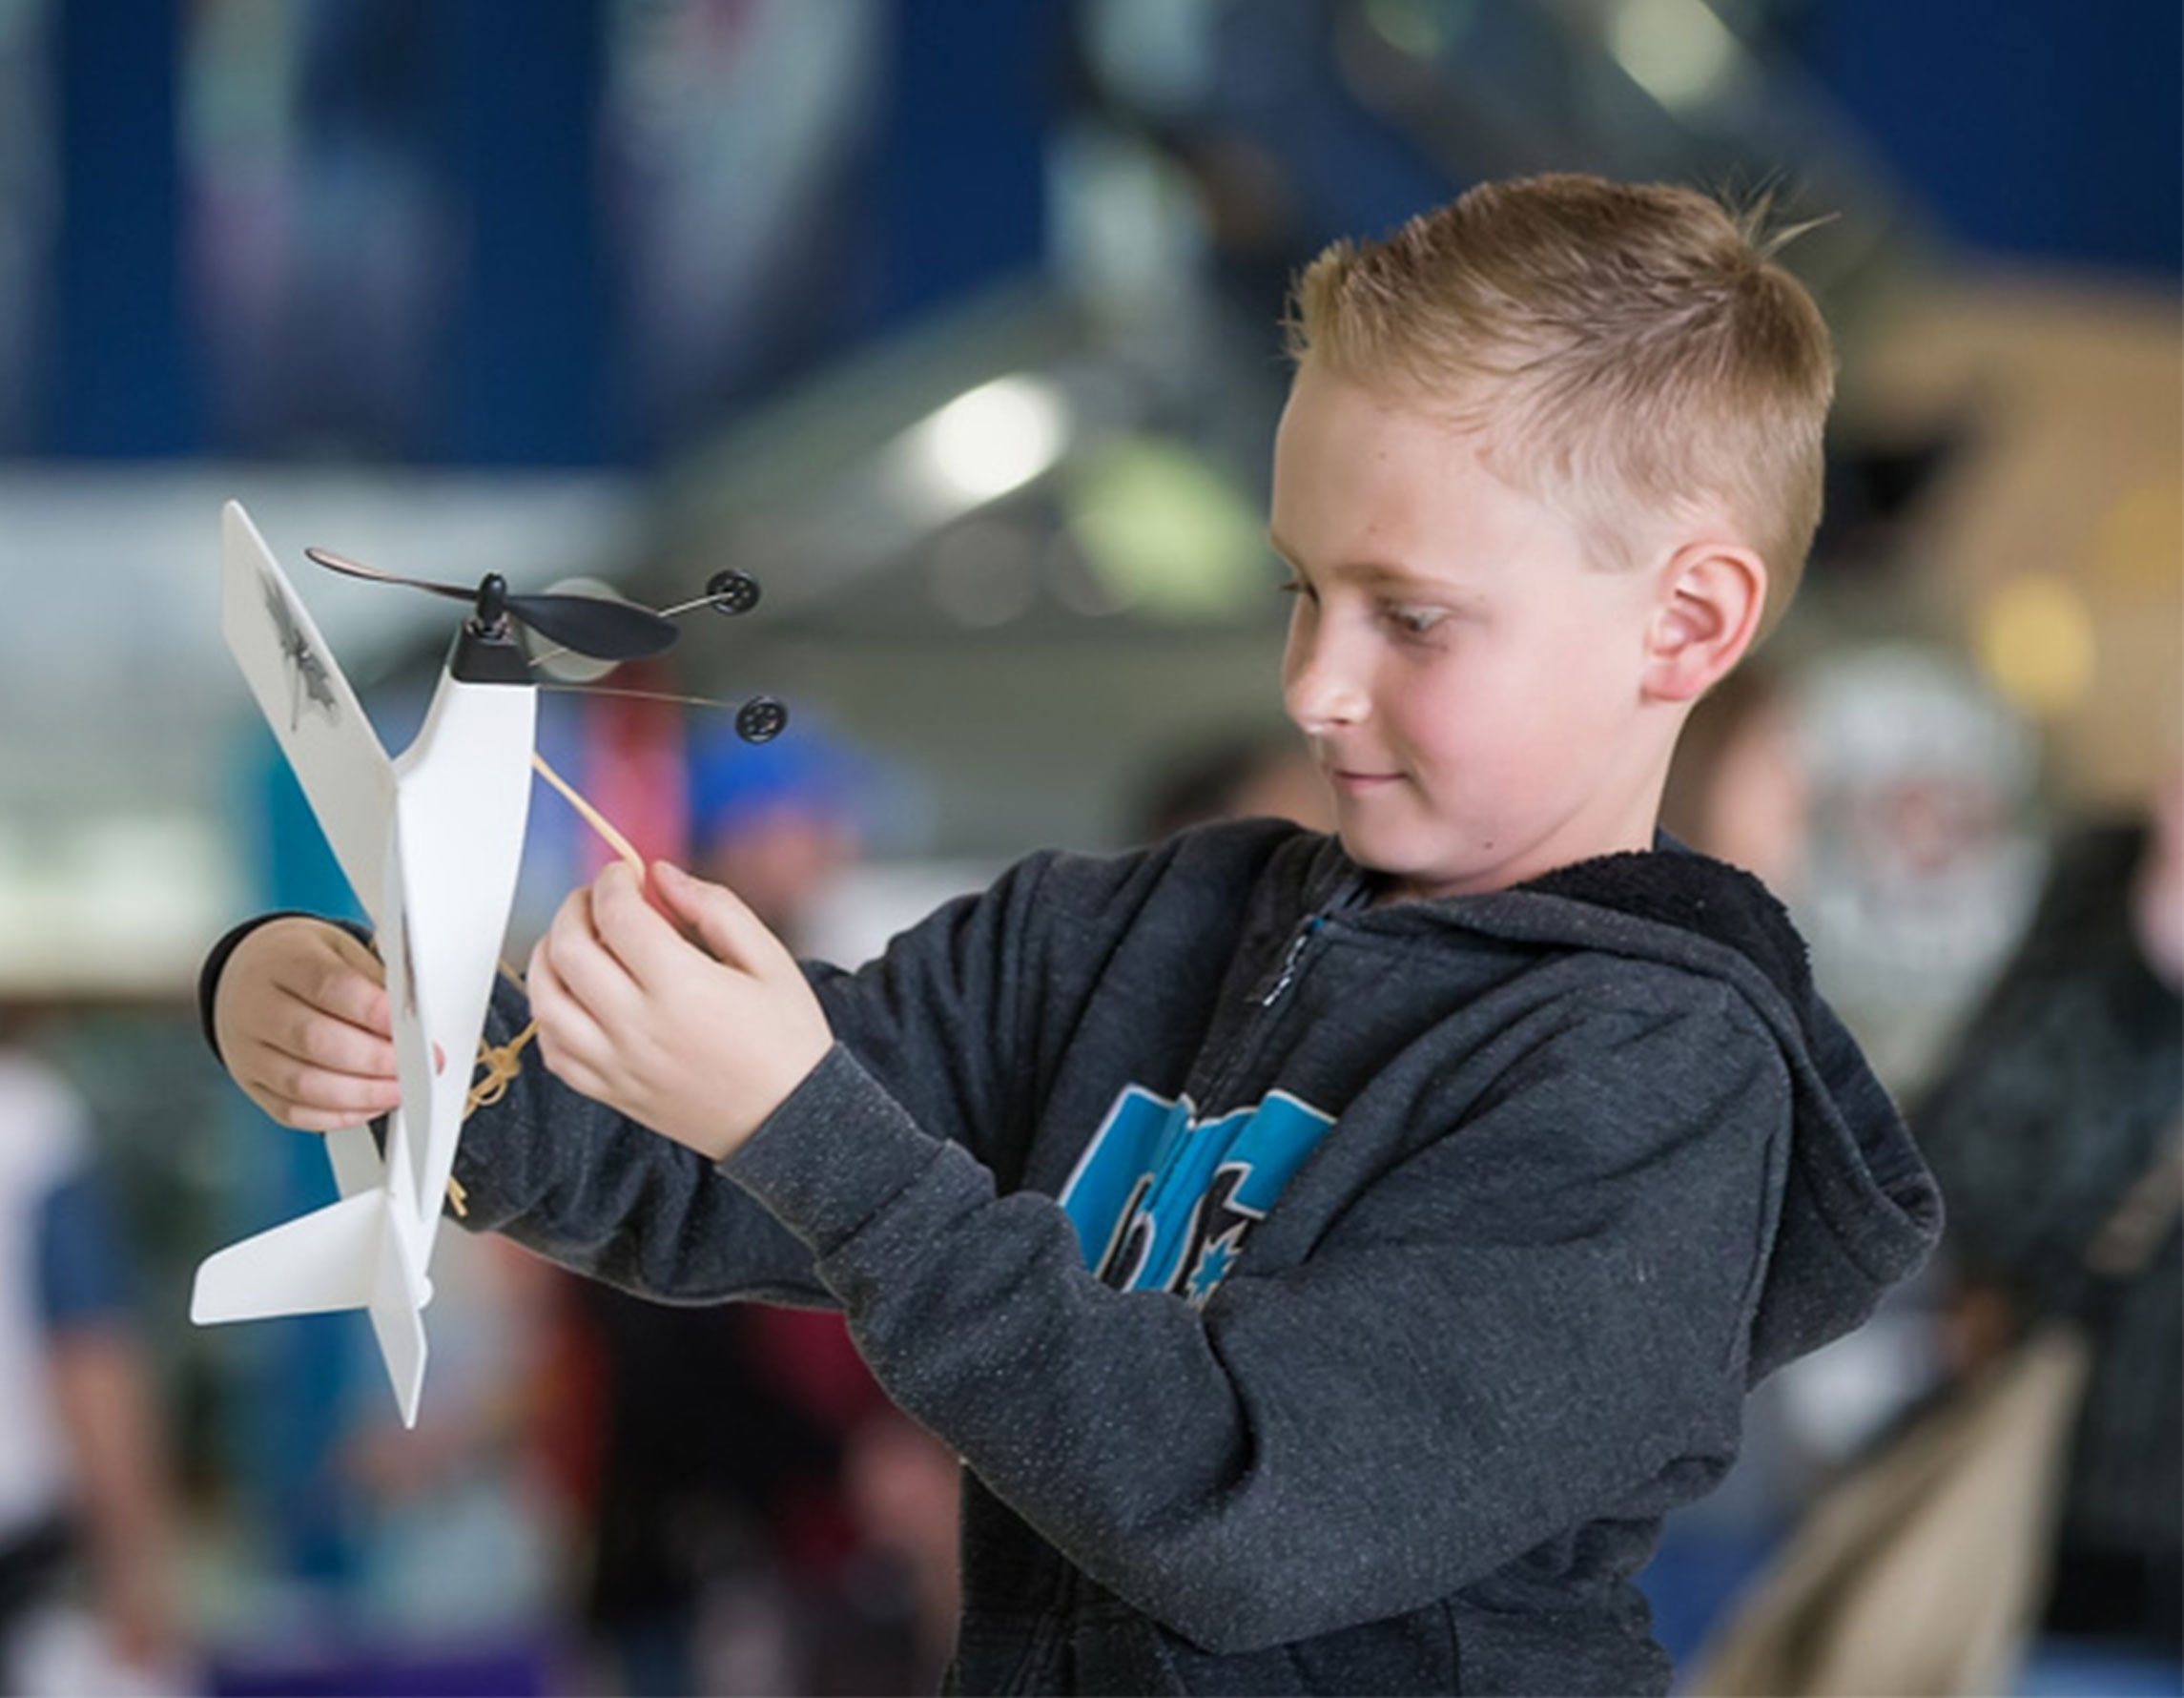 Student holding model airplane